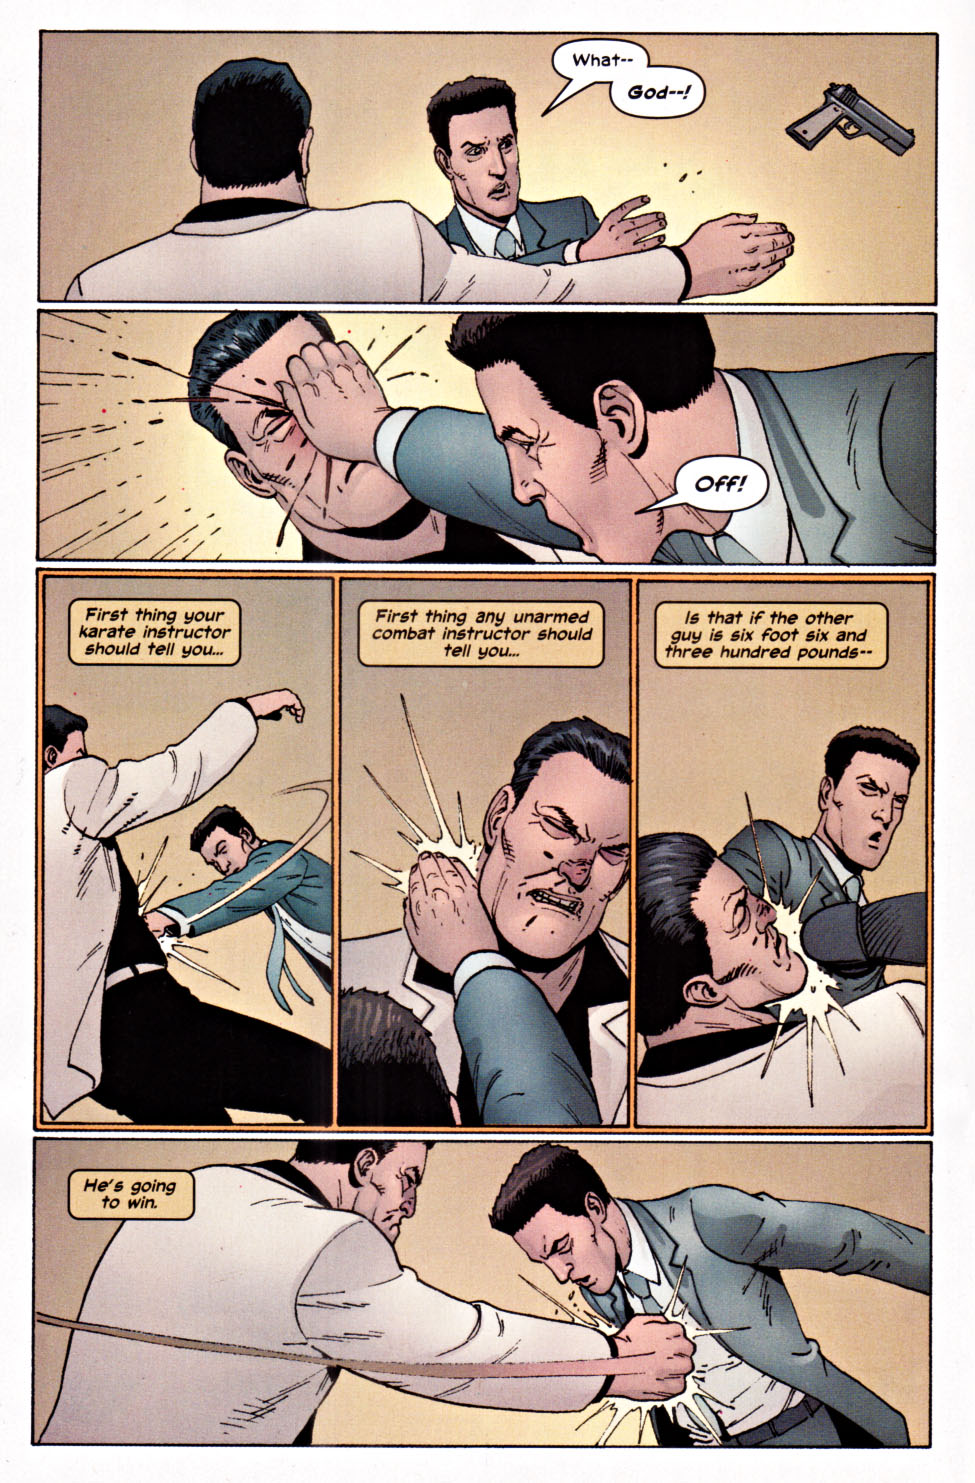 The Punisher (2001) issue 22 - Brotherhood #03 - Page 16